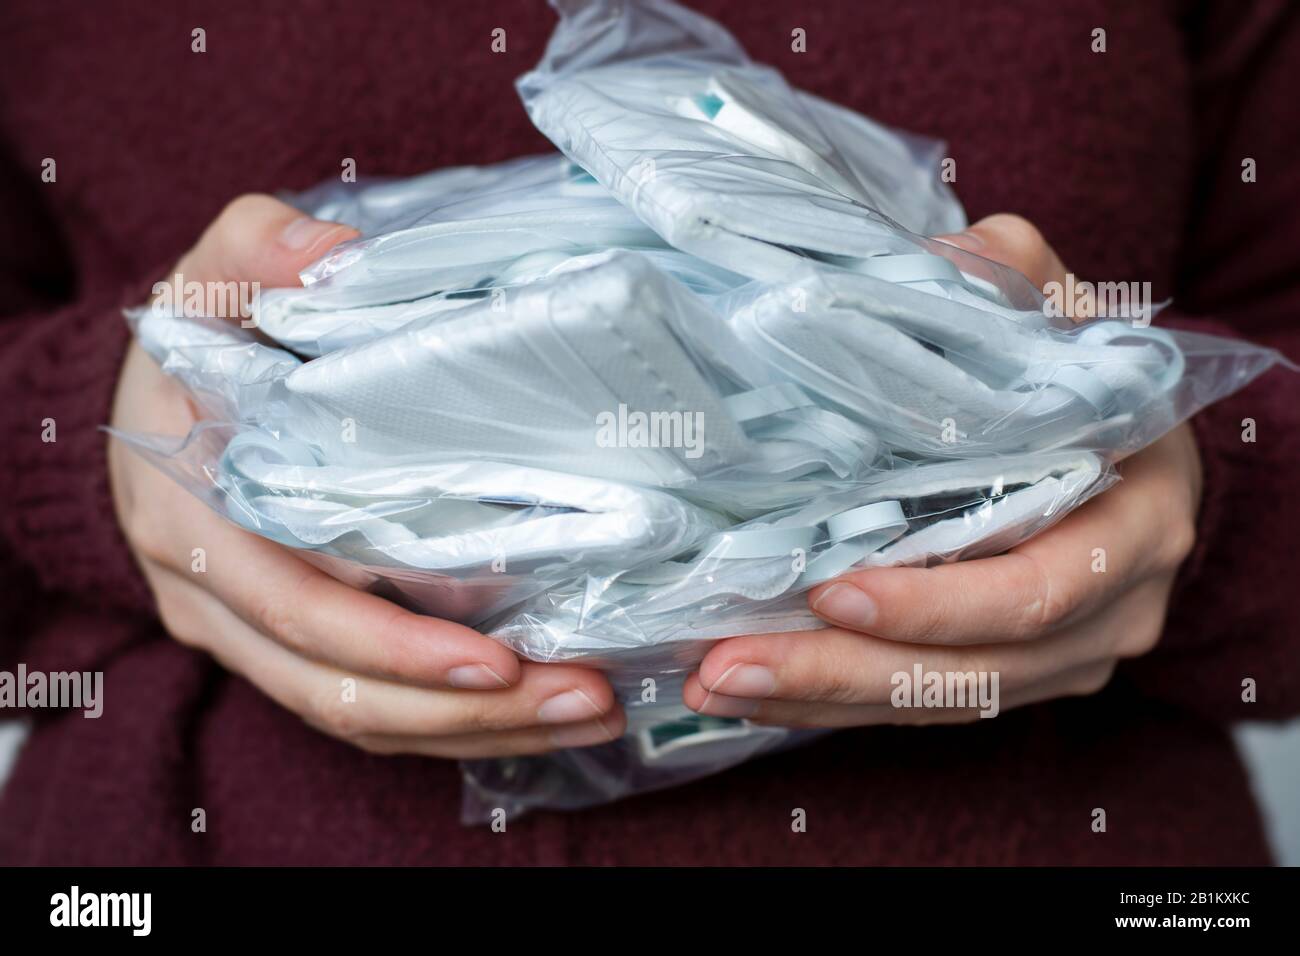 Woman holding a lot of medical face dust filter masks, disposable FFP3 respirators. Coronavirus, air pollution, virus, flu and infectious diseases. Stock Photo